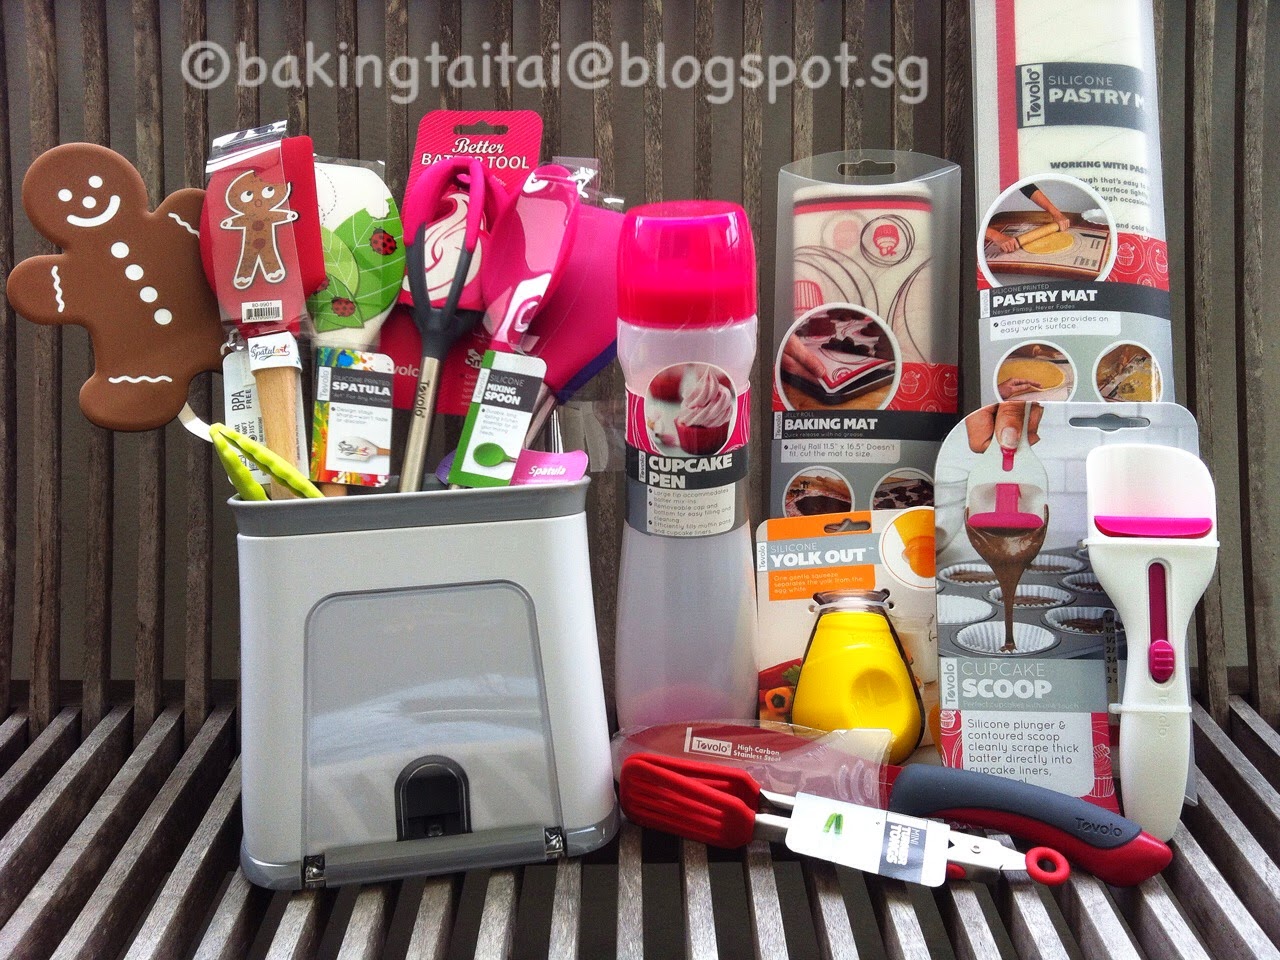 Tovolo Baking & Cooking Utensils Sponsored by Kitchenary